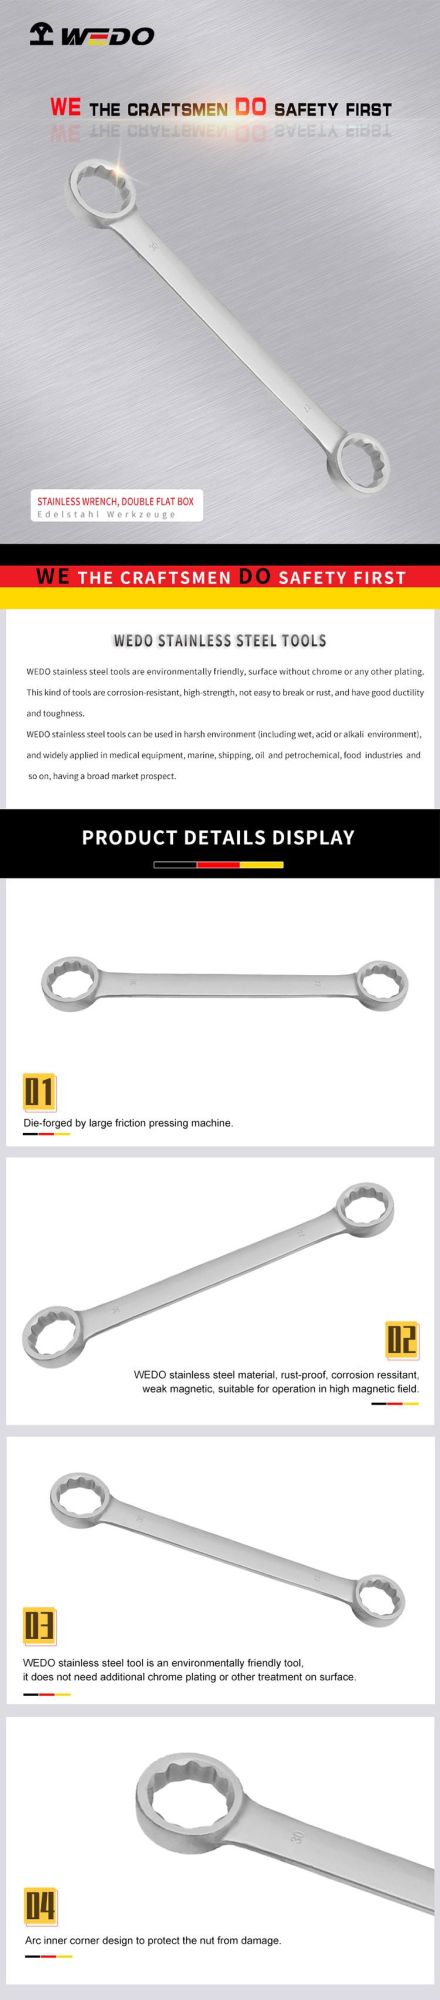 WEDO Stainless Steel Double Flat Box Wrench 304/316/420 Material Available